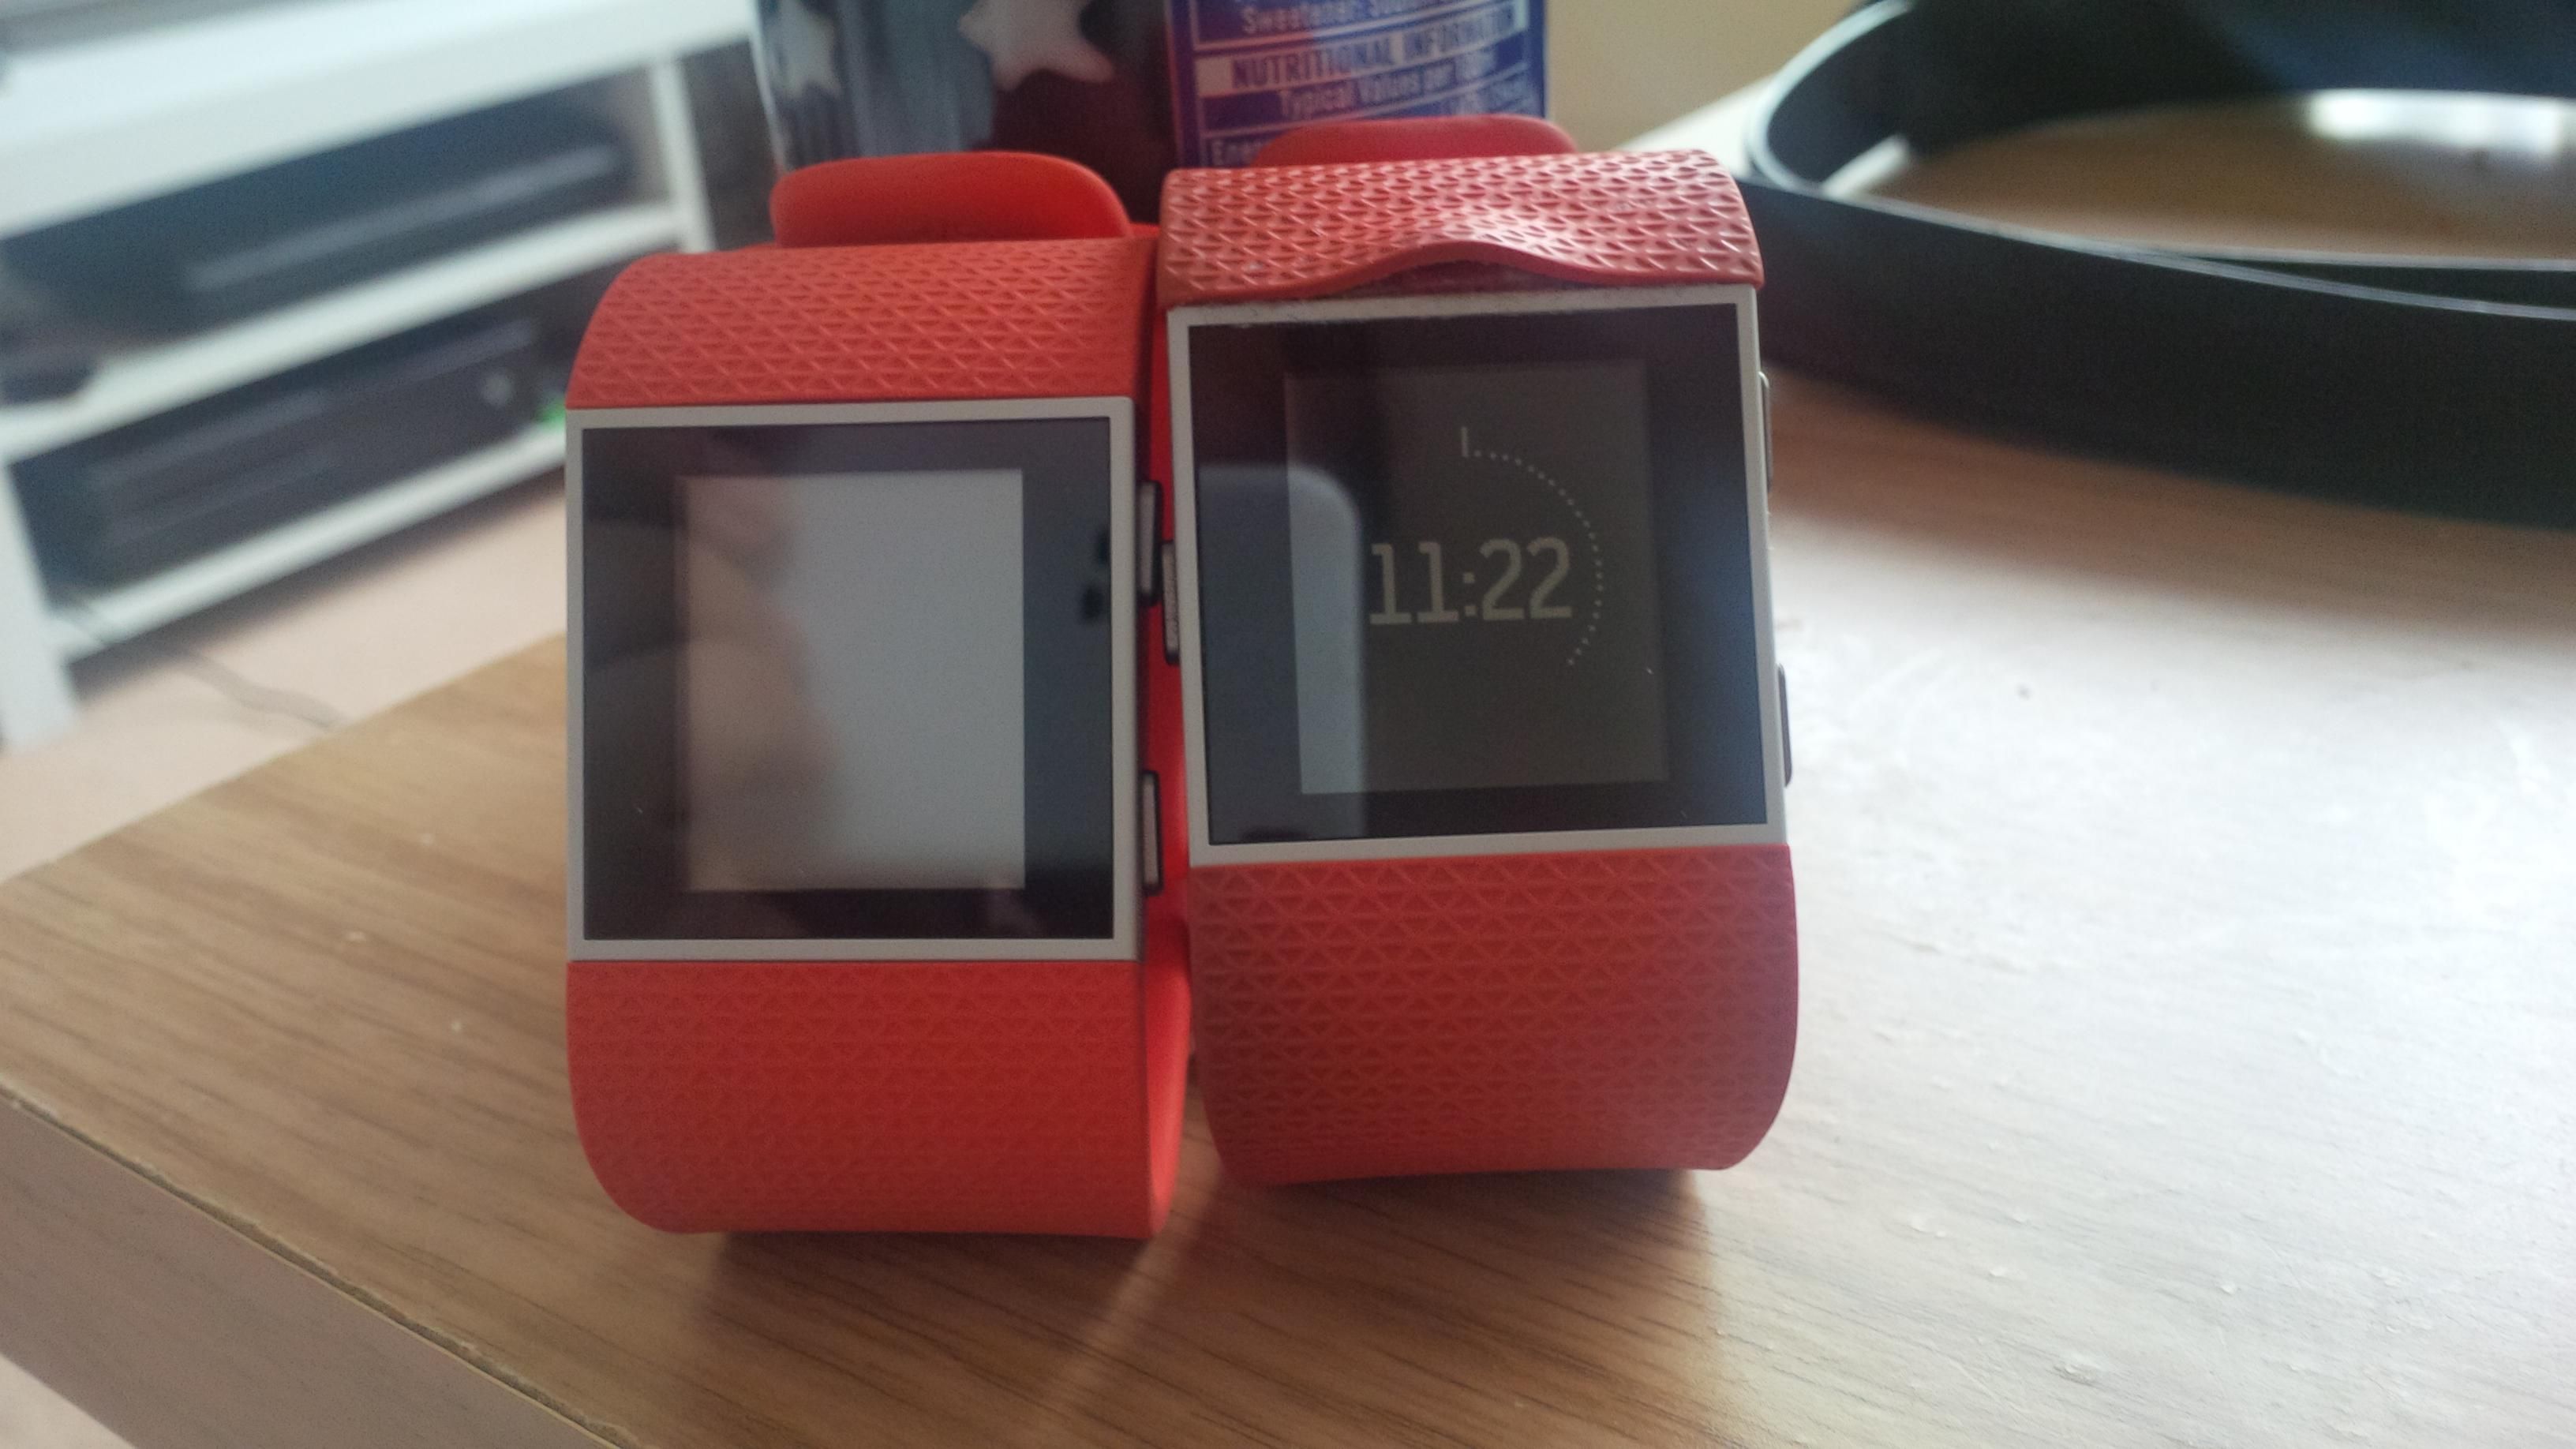 fitbit surge watch bands